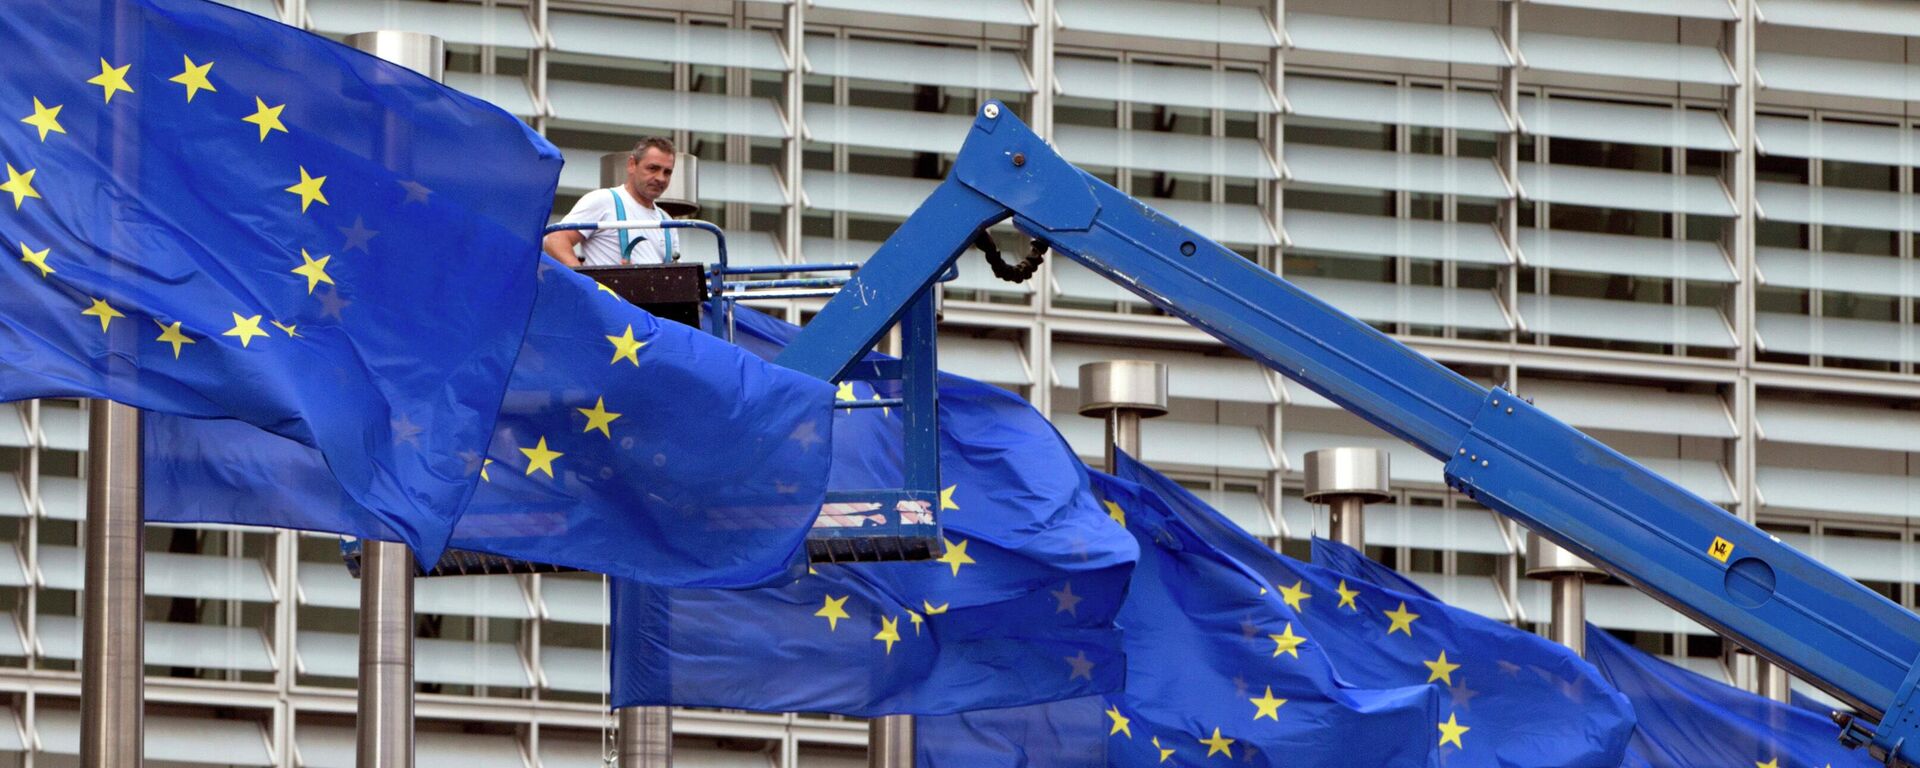 FILE- In this June 23, 2016 file photo, a worker on a lift adjusts the EU flags in front of EU headquarters in Brussels - Sputnik International, 1920, 03.06.2022